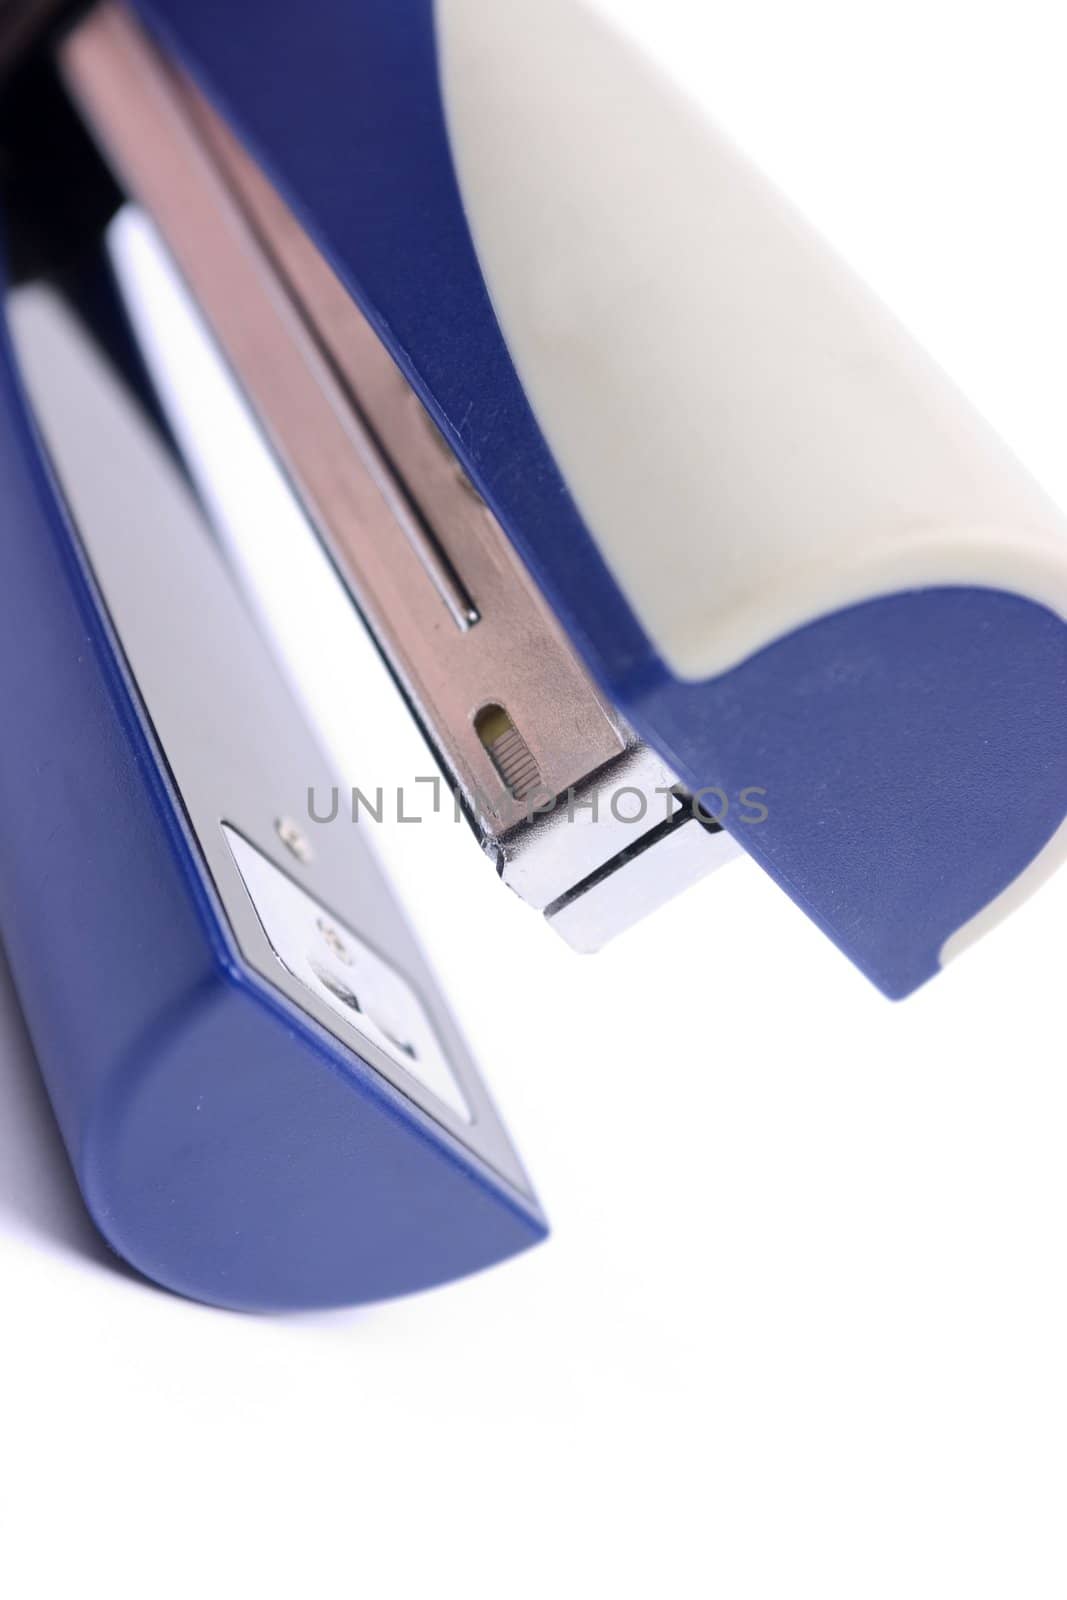 Closeup of blue stapler isolated on white background